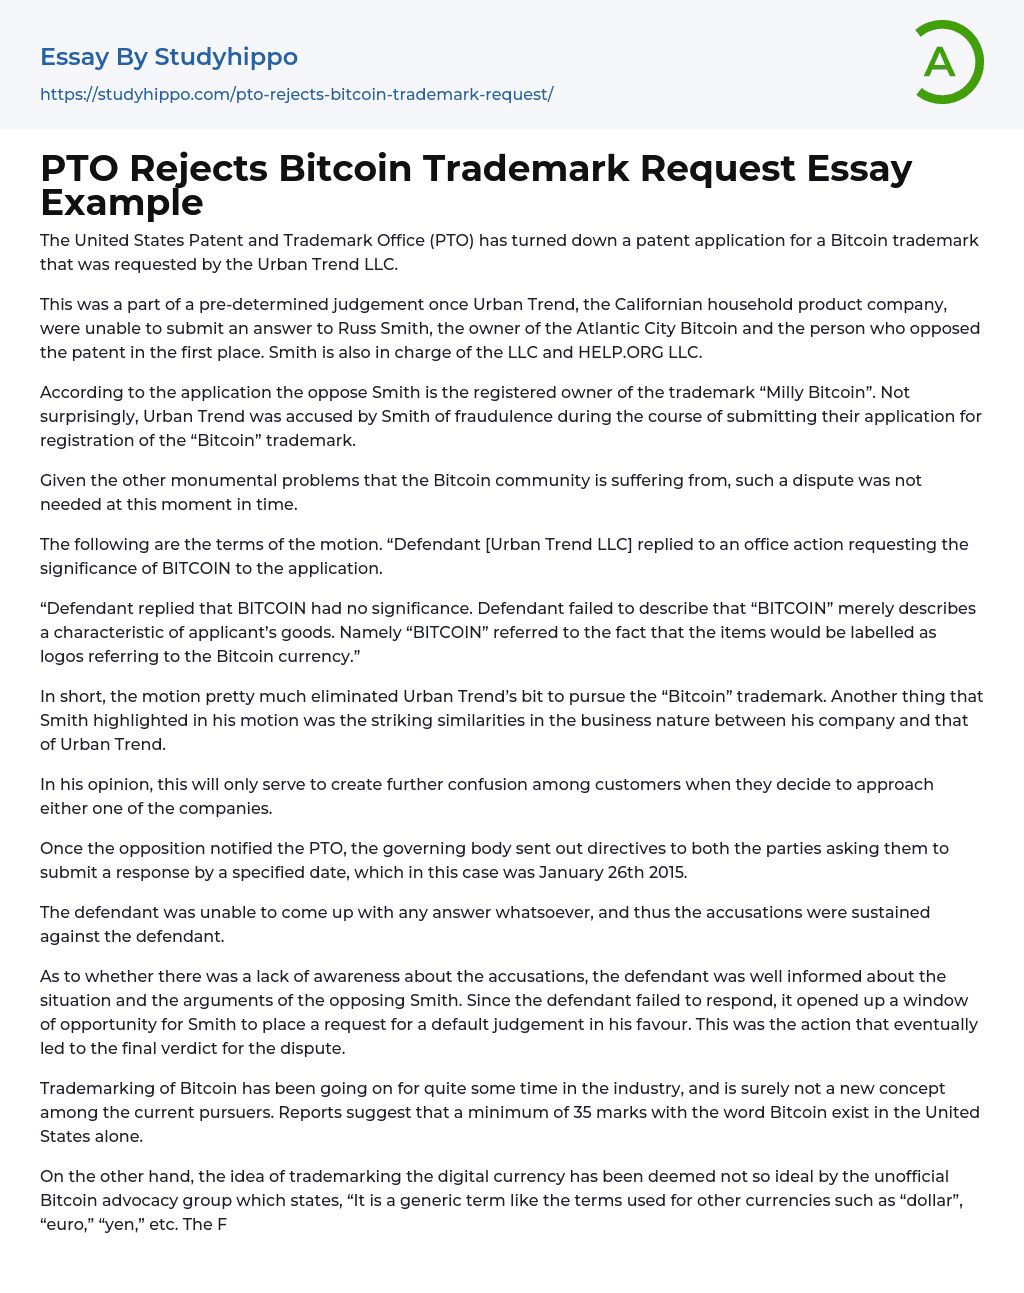 PTO Rejects Bitcoin Trademark Request Essay Example